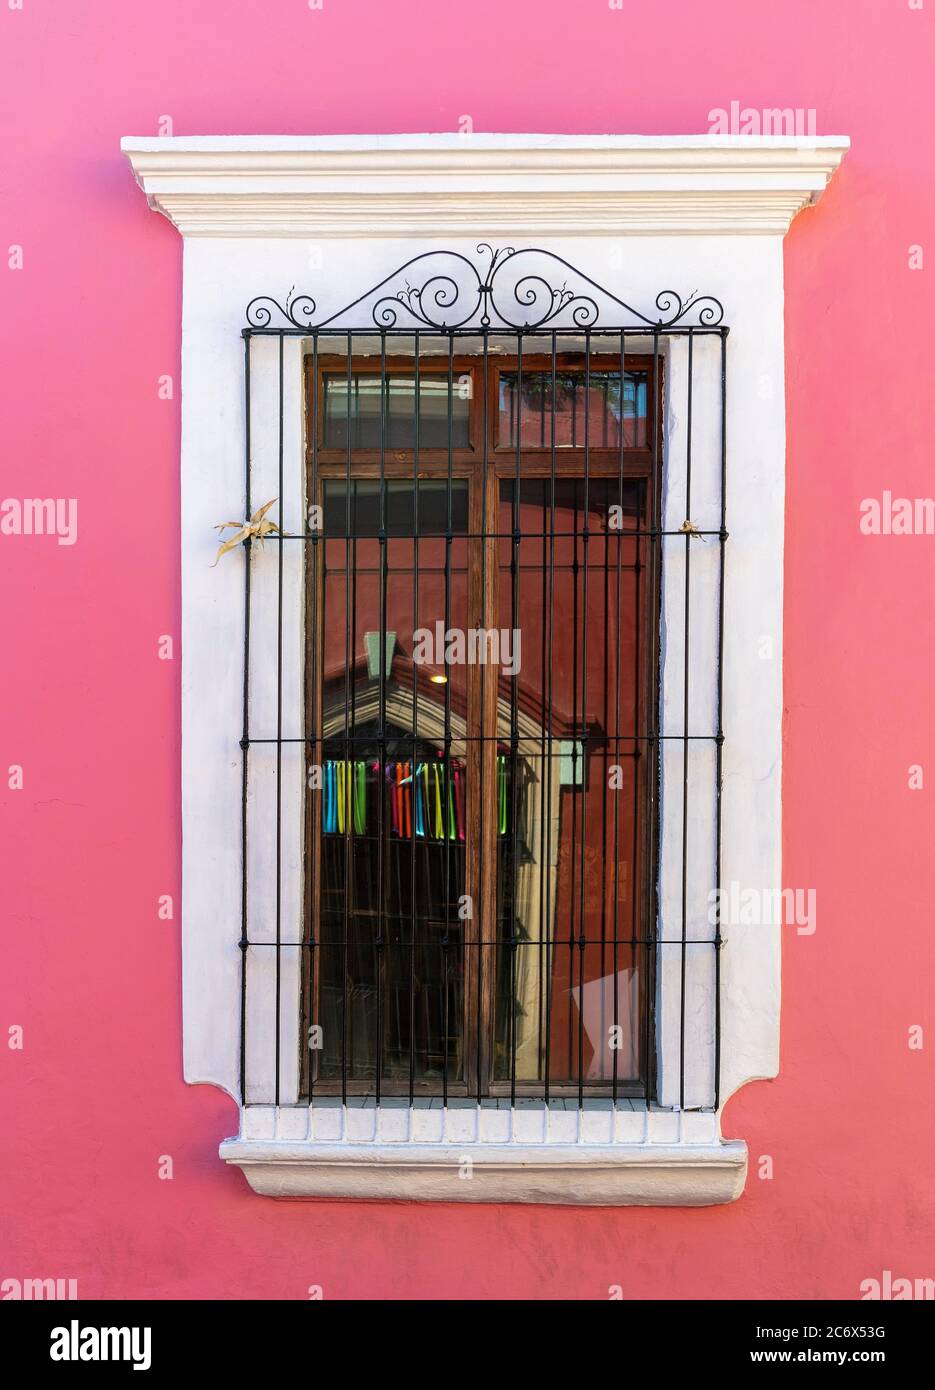 Colonial style architecture with a pink wall and wrought iron decoration on wooden window, Oaxaca, Mexico. Stock Photo